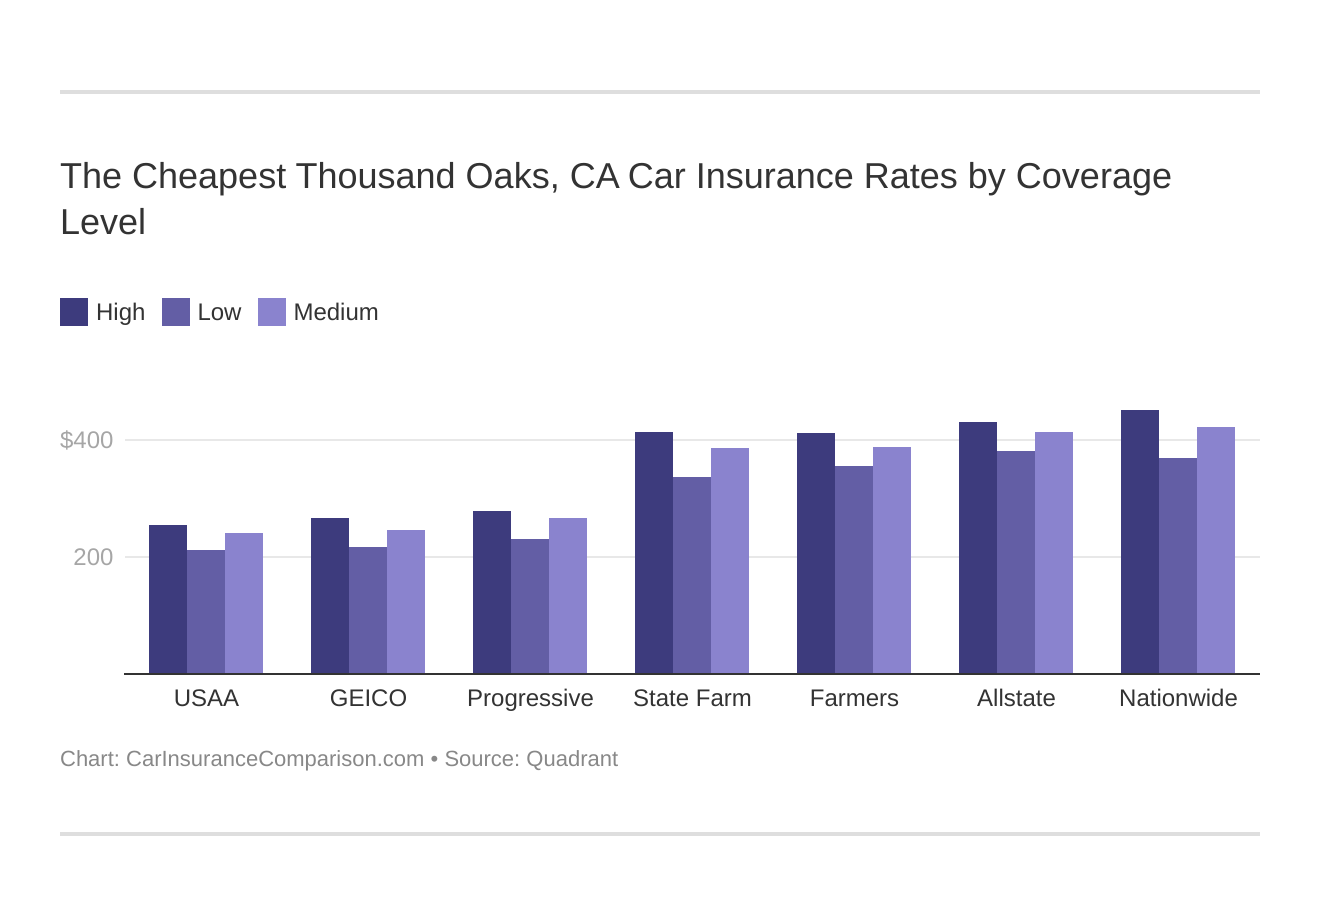 The Cheapest Thousand Oaks, CA Car Insurance Rates by Coverage Level